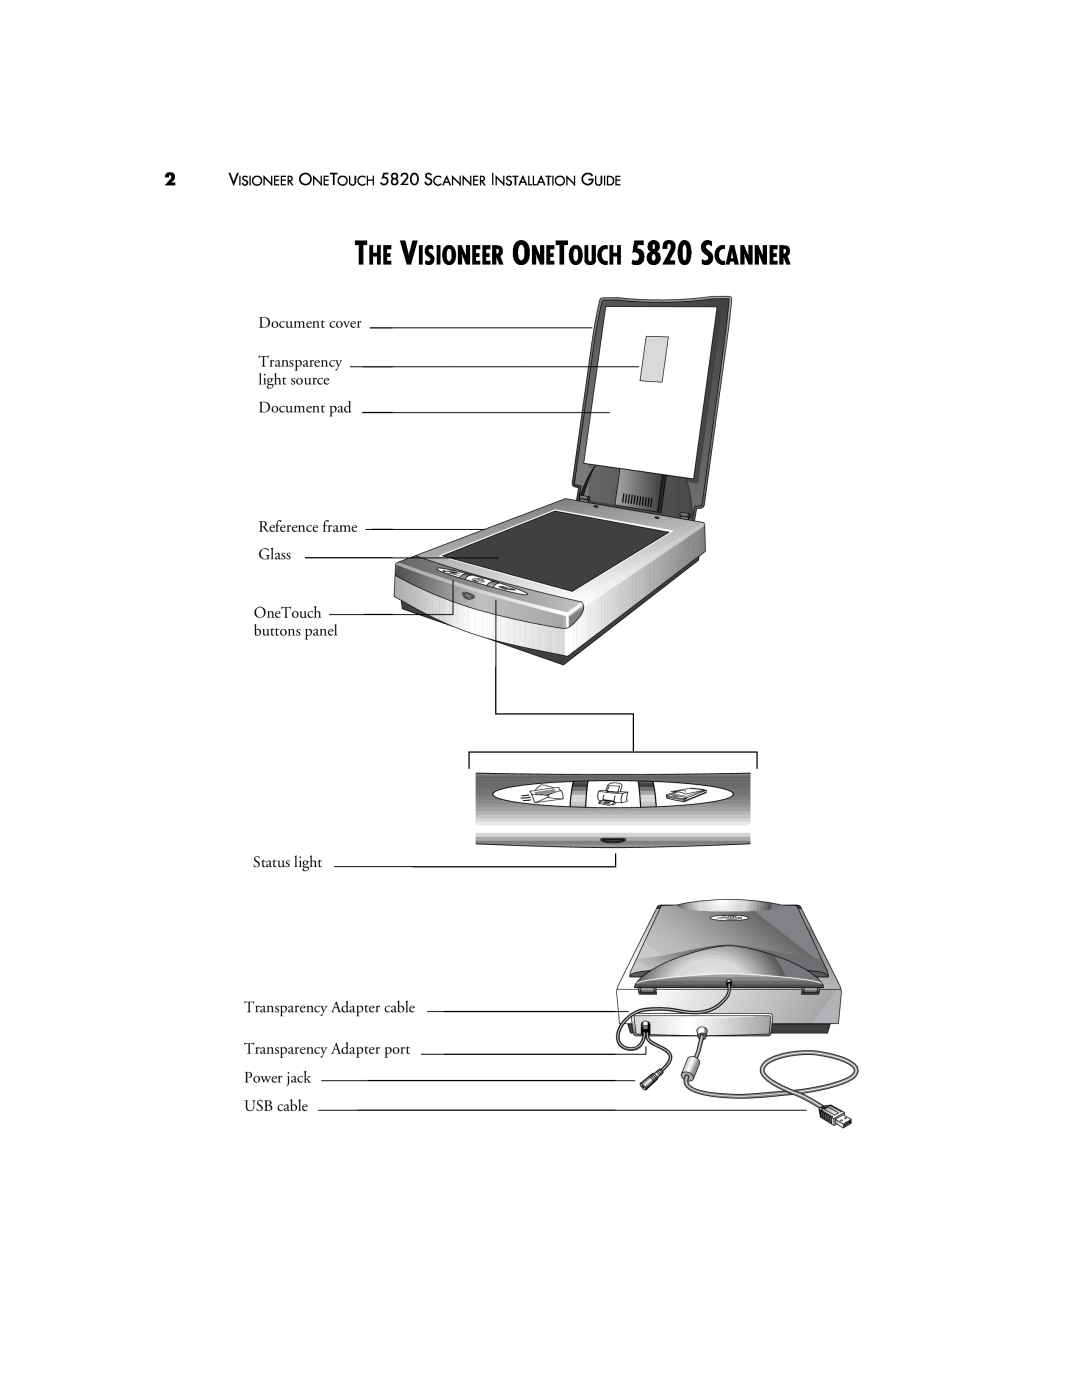 Visioneer manual THE VISIONEER ONETOUCH 5820 SCANNER 